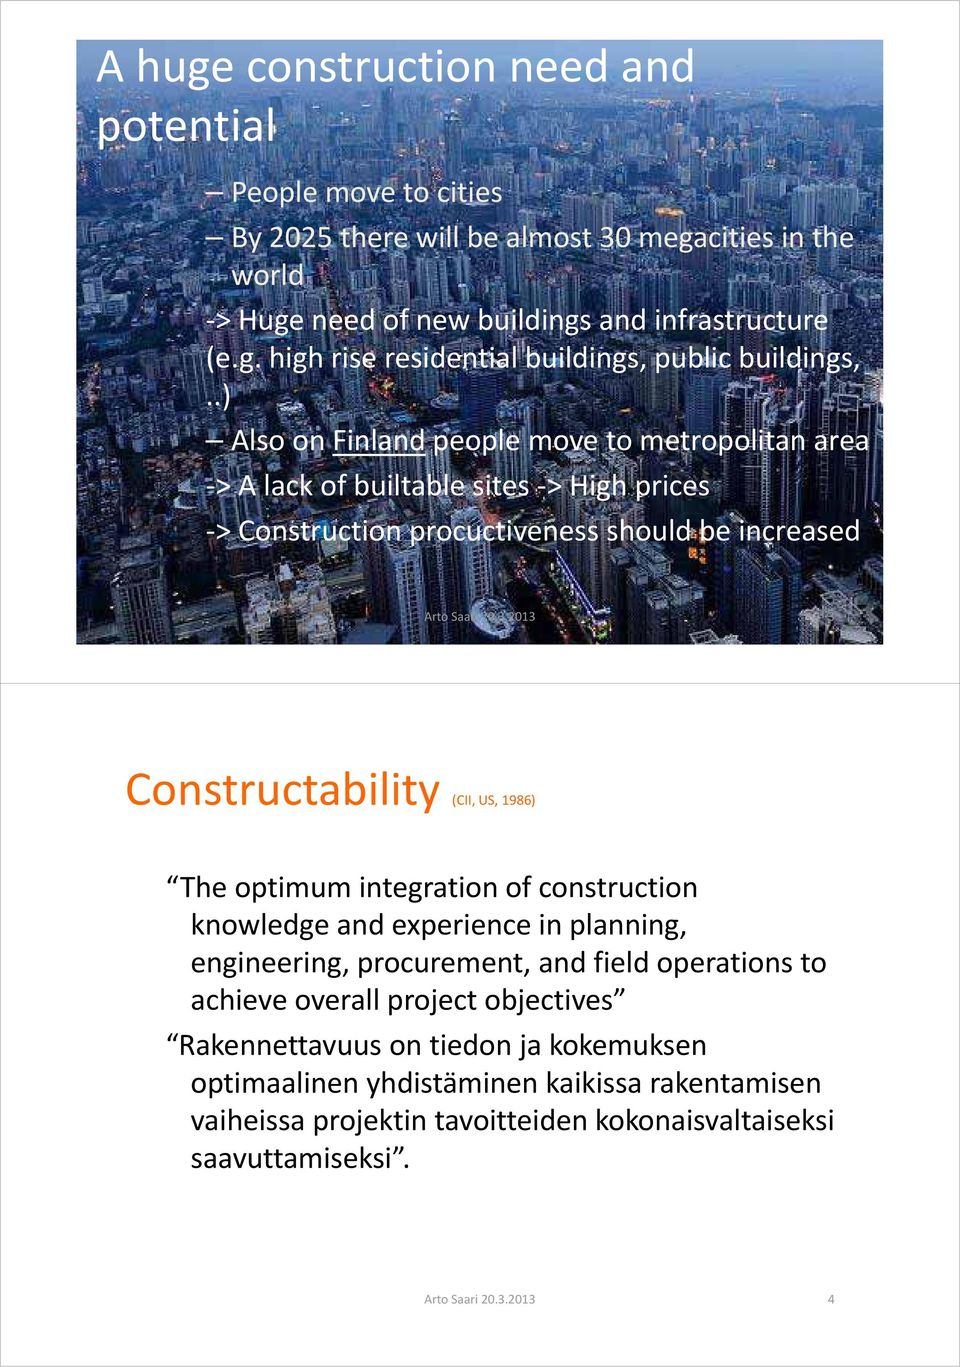 2013 3 Constructability (CII, US, 1986) The optimum integration of construction knowledge and experience in planning, engineering, procurement, and field operations to achieve overall